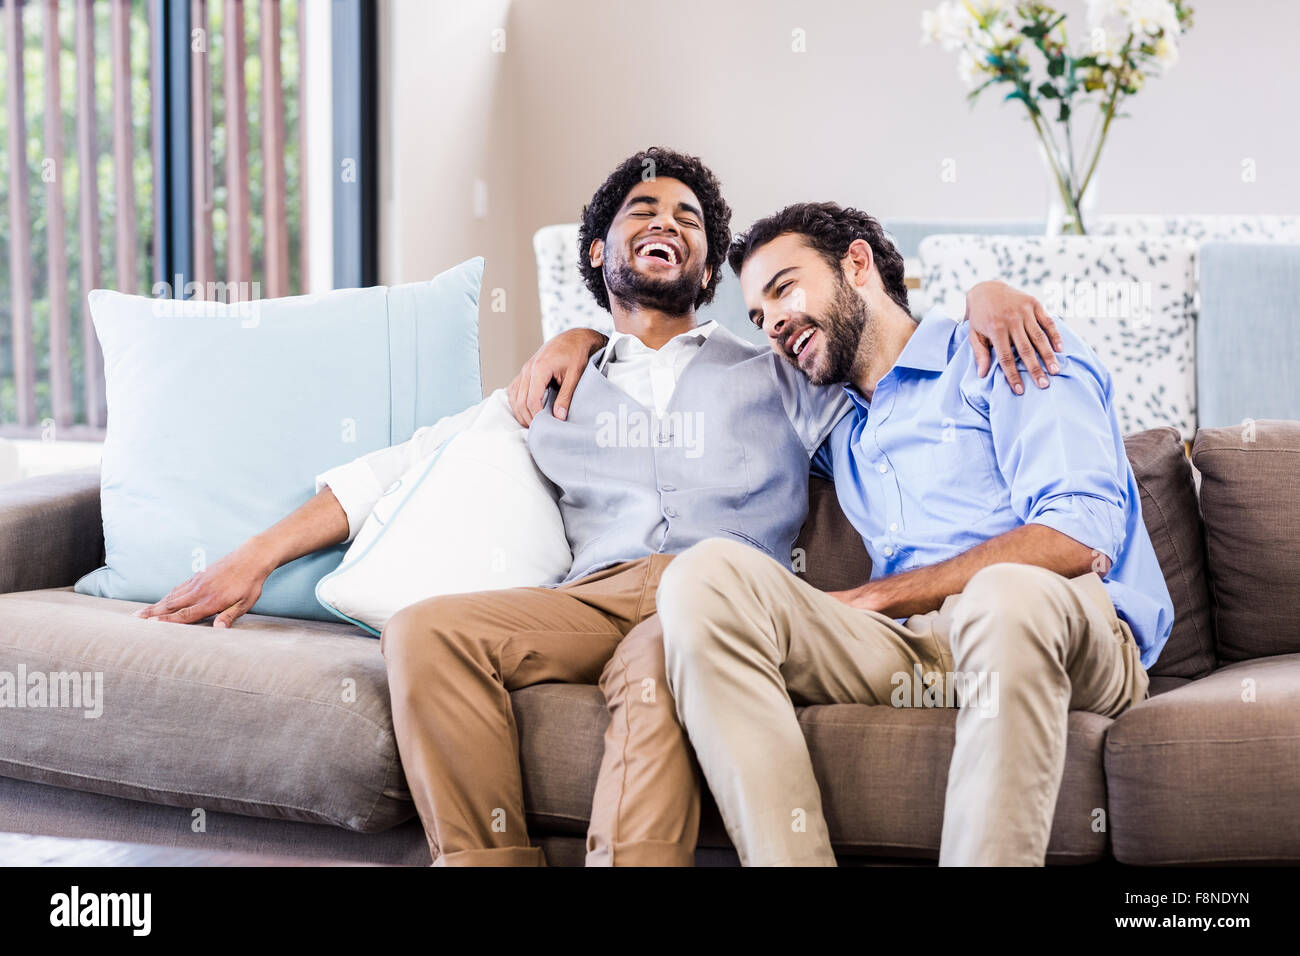 Happy gay couple laughing Stock Photo